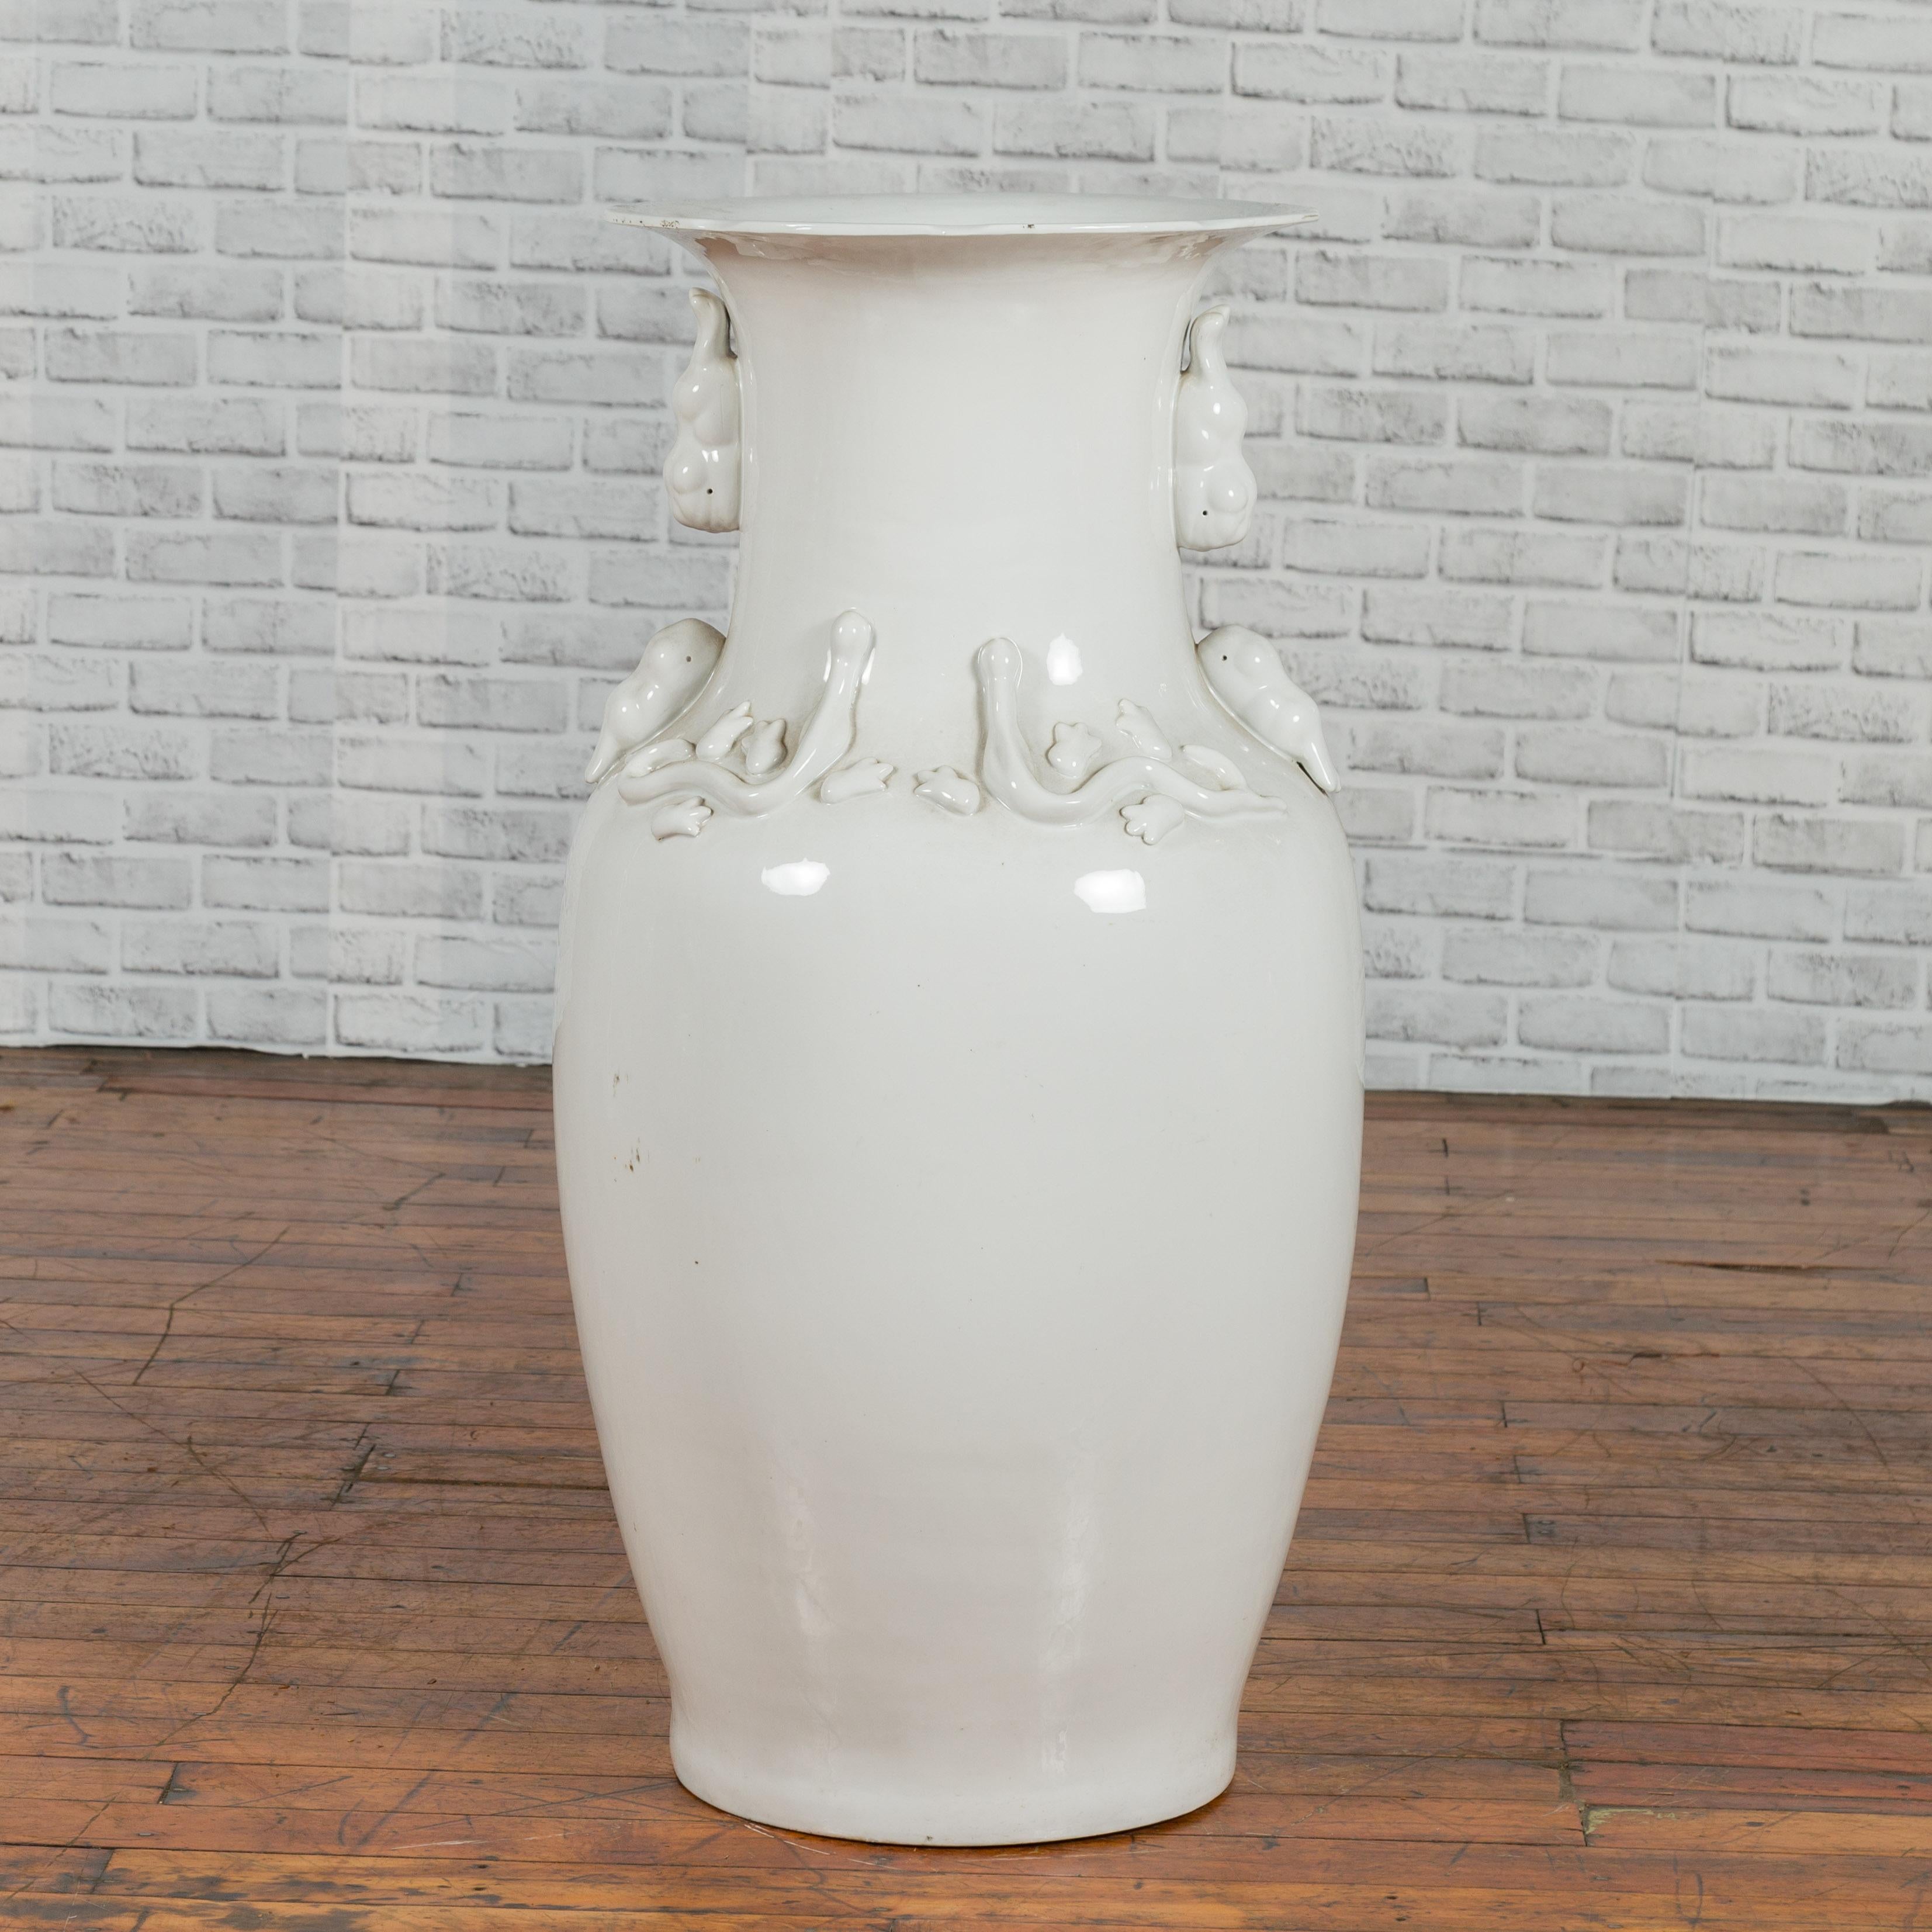 A large Chinese vintage white porcelain palace vase from the mid-20th century, with petite decorative motifs. Created in China during the midcentury period, this porcelain vase features a tall neck with petite decorative motifs, supporting a flaring